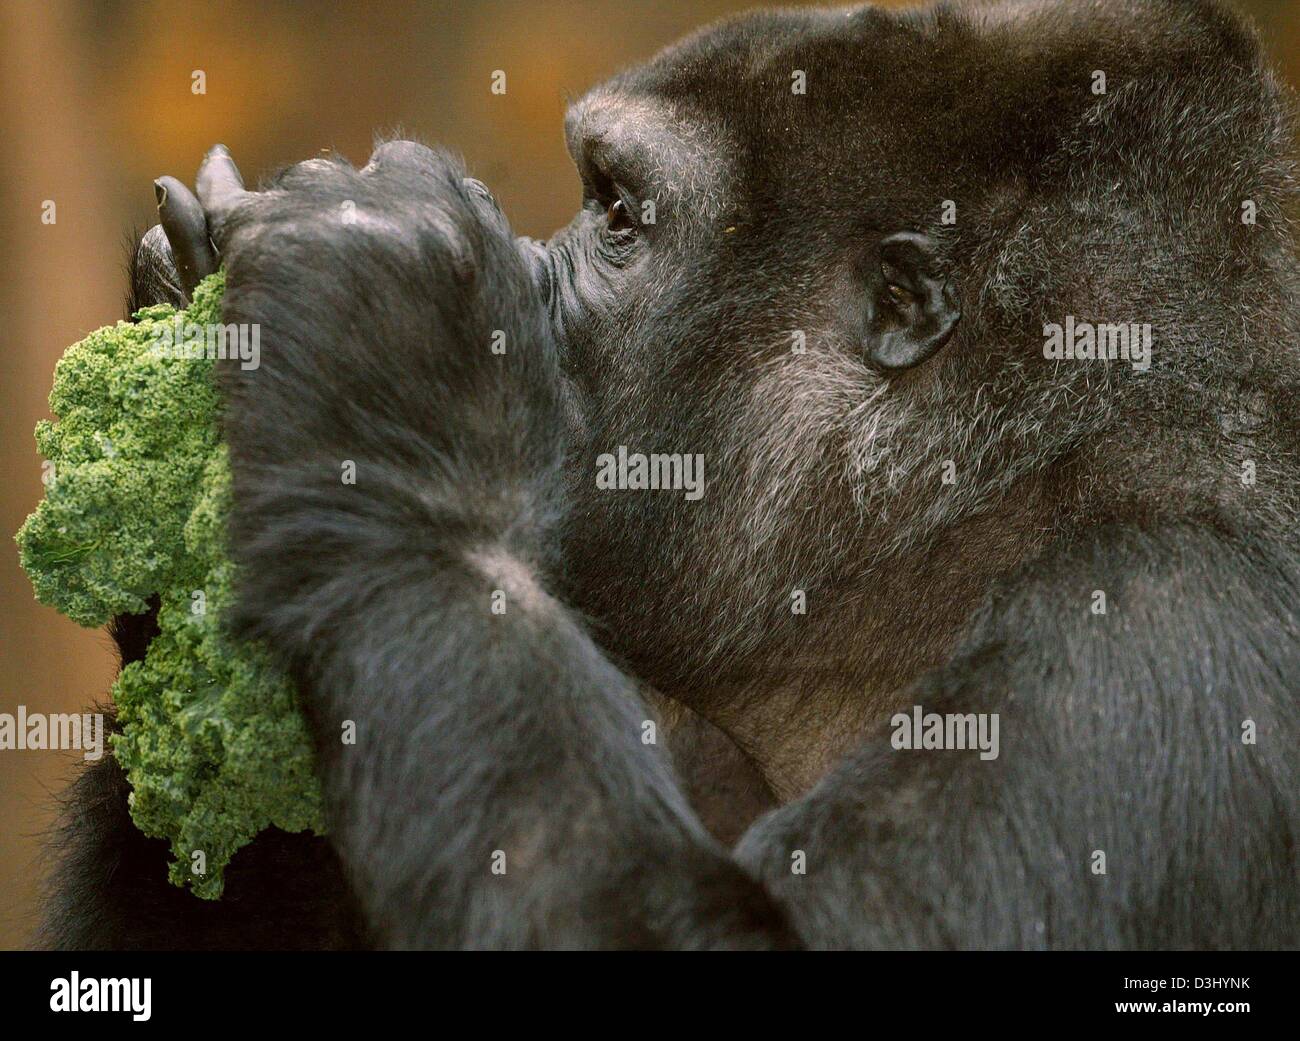 What do gorillas eat? And other gorilla facts - WWF